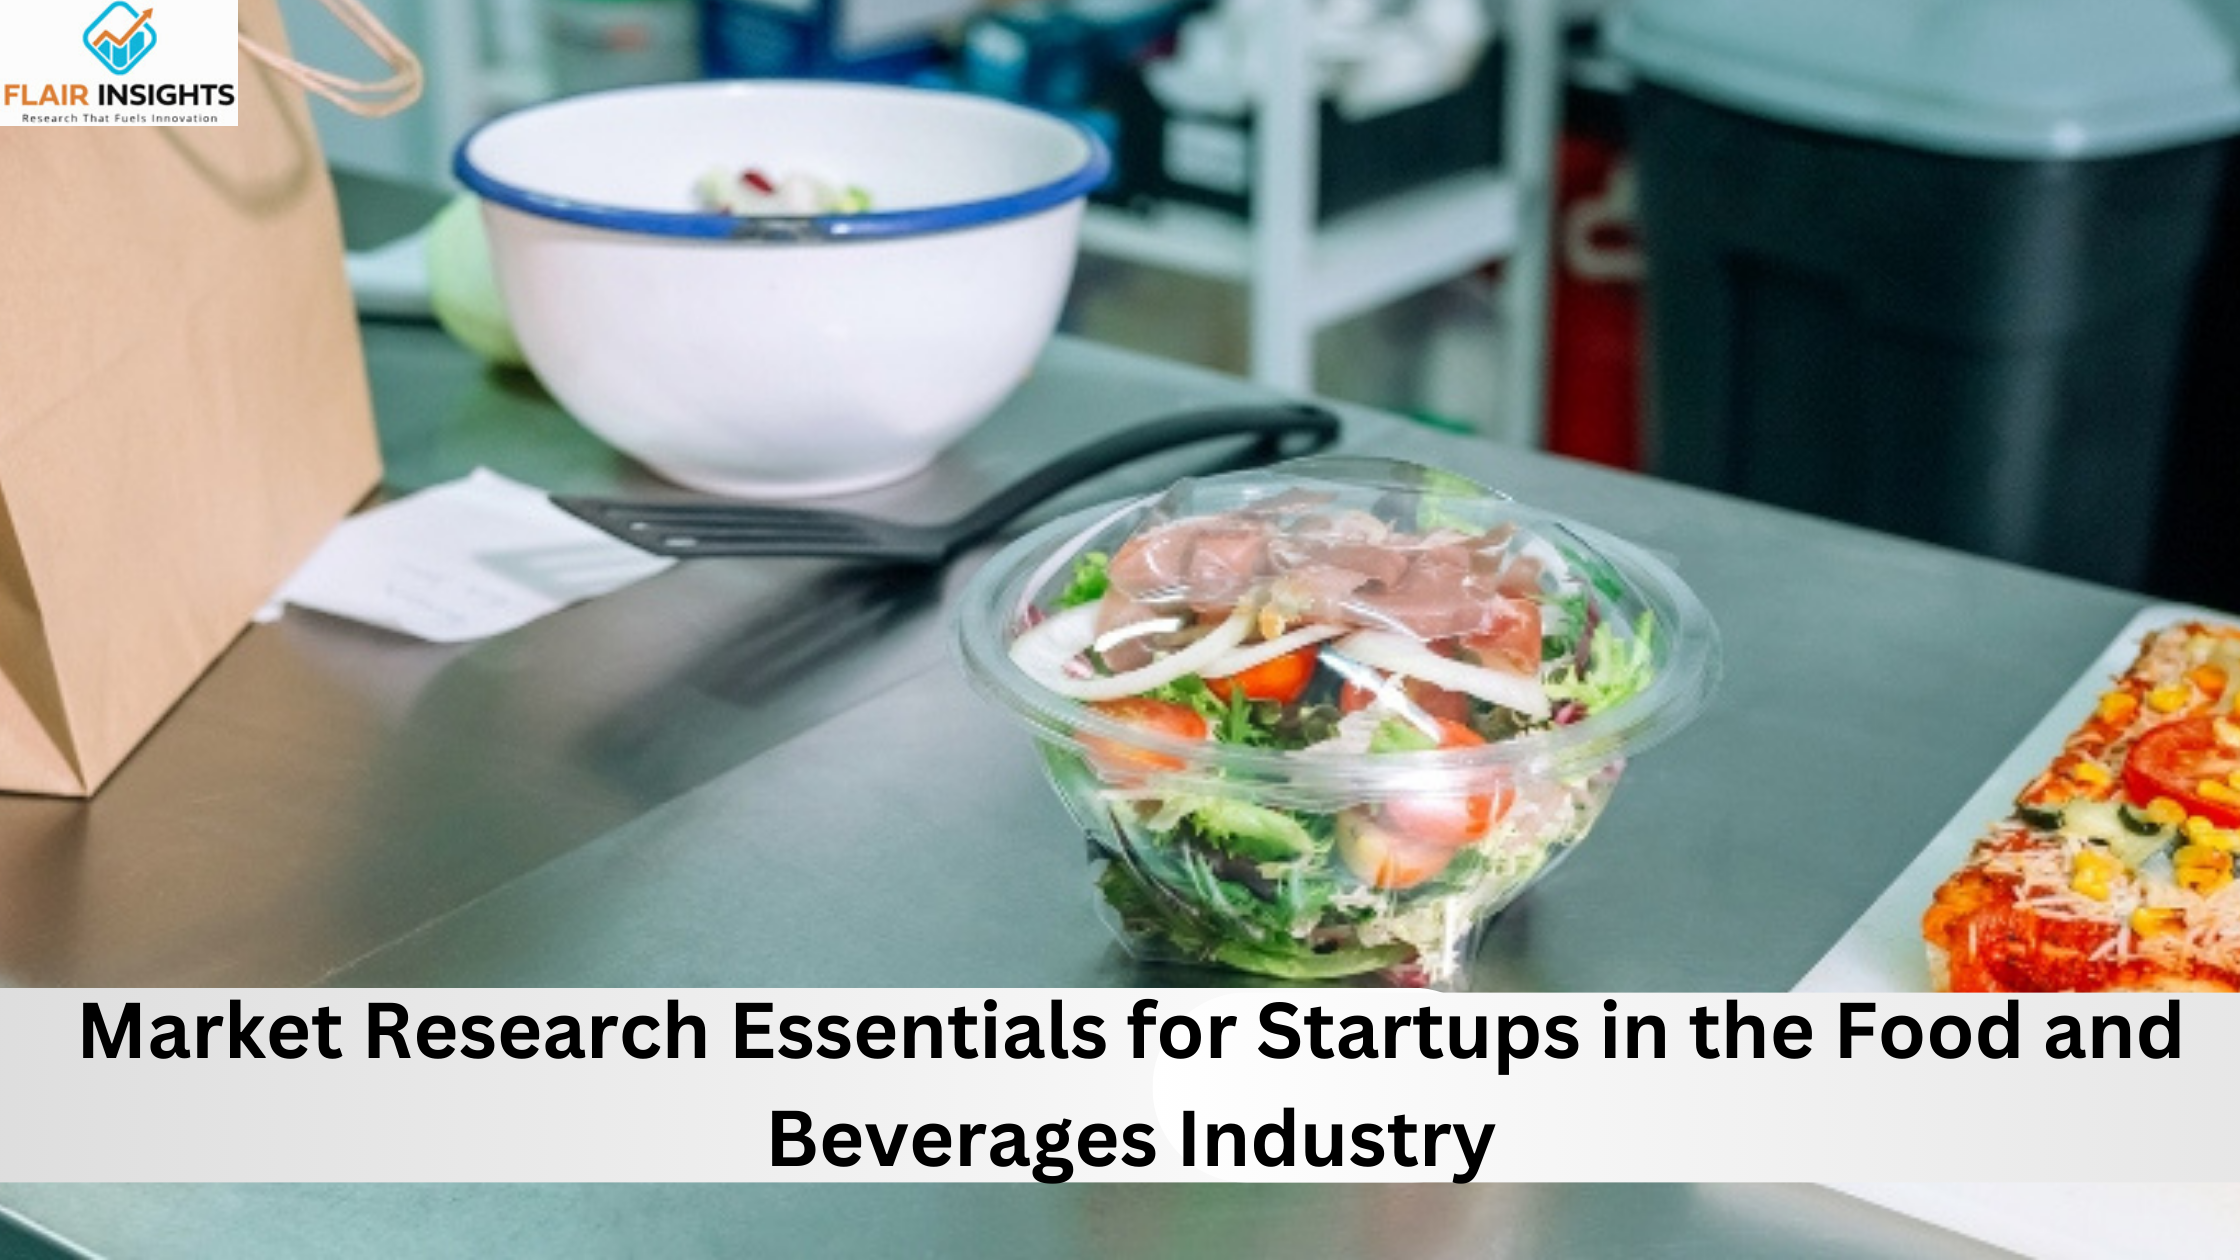 Market Research Essentials for Startups in the Food and Beverages Industry